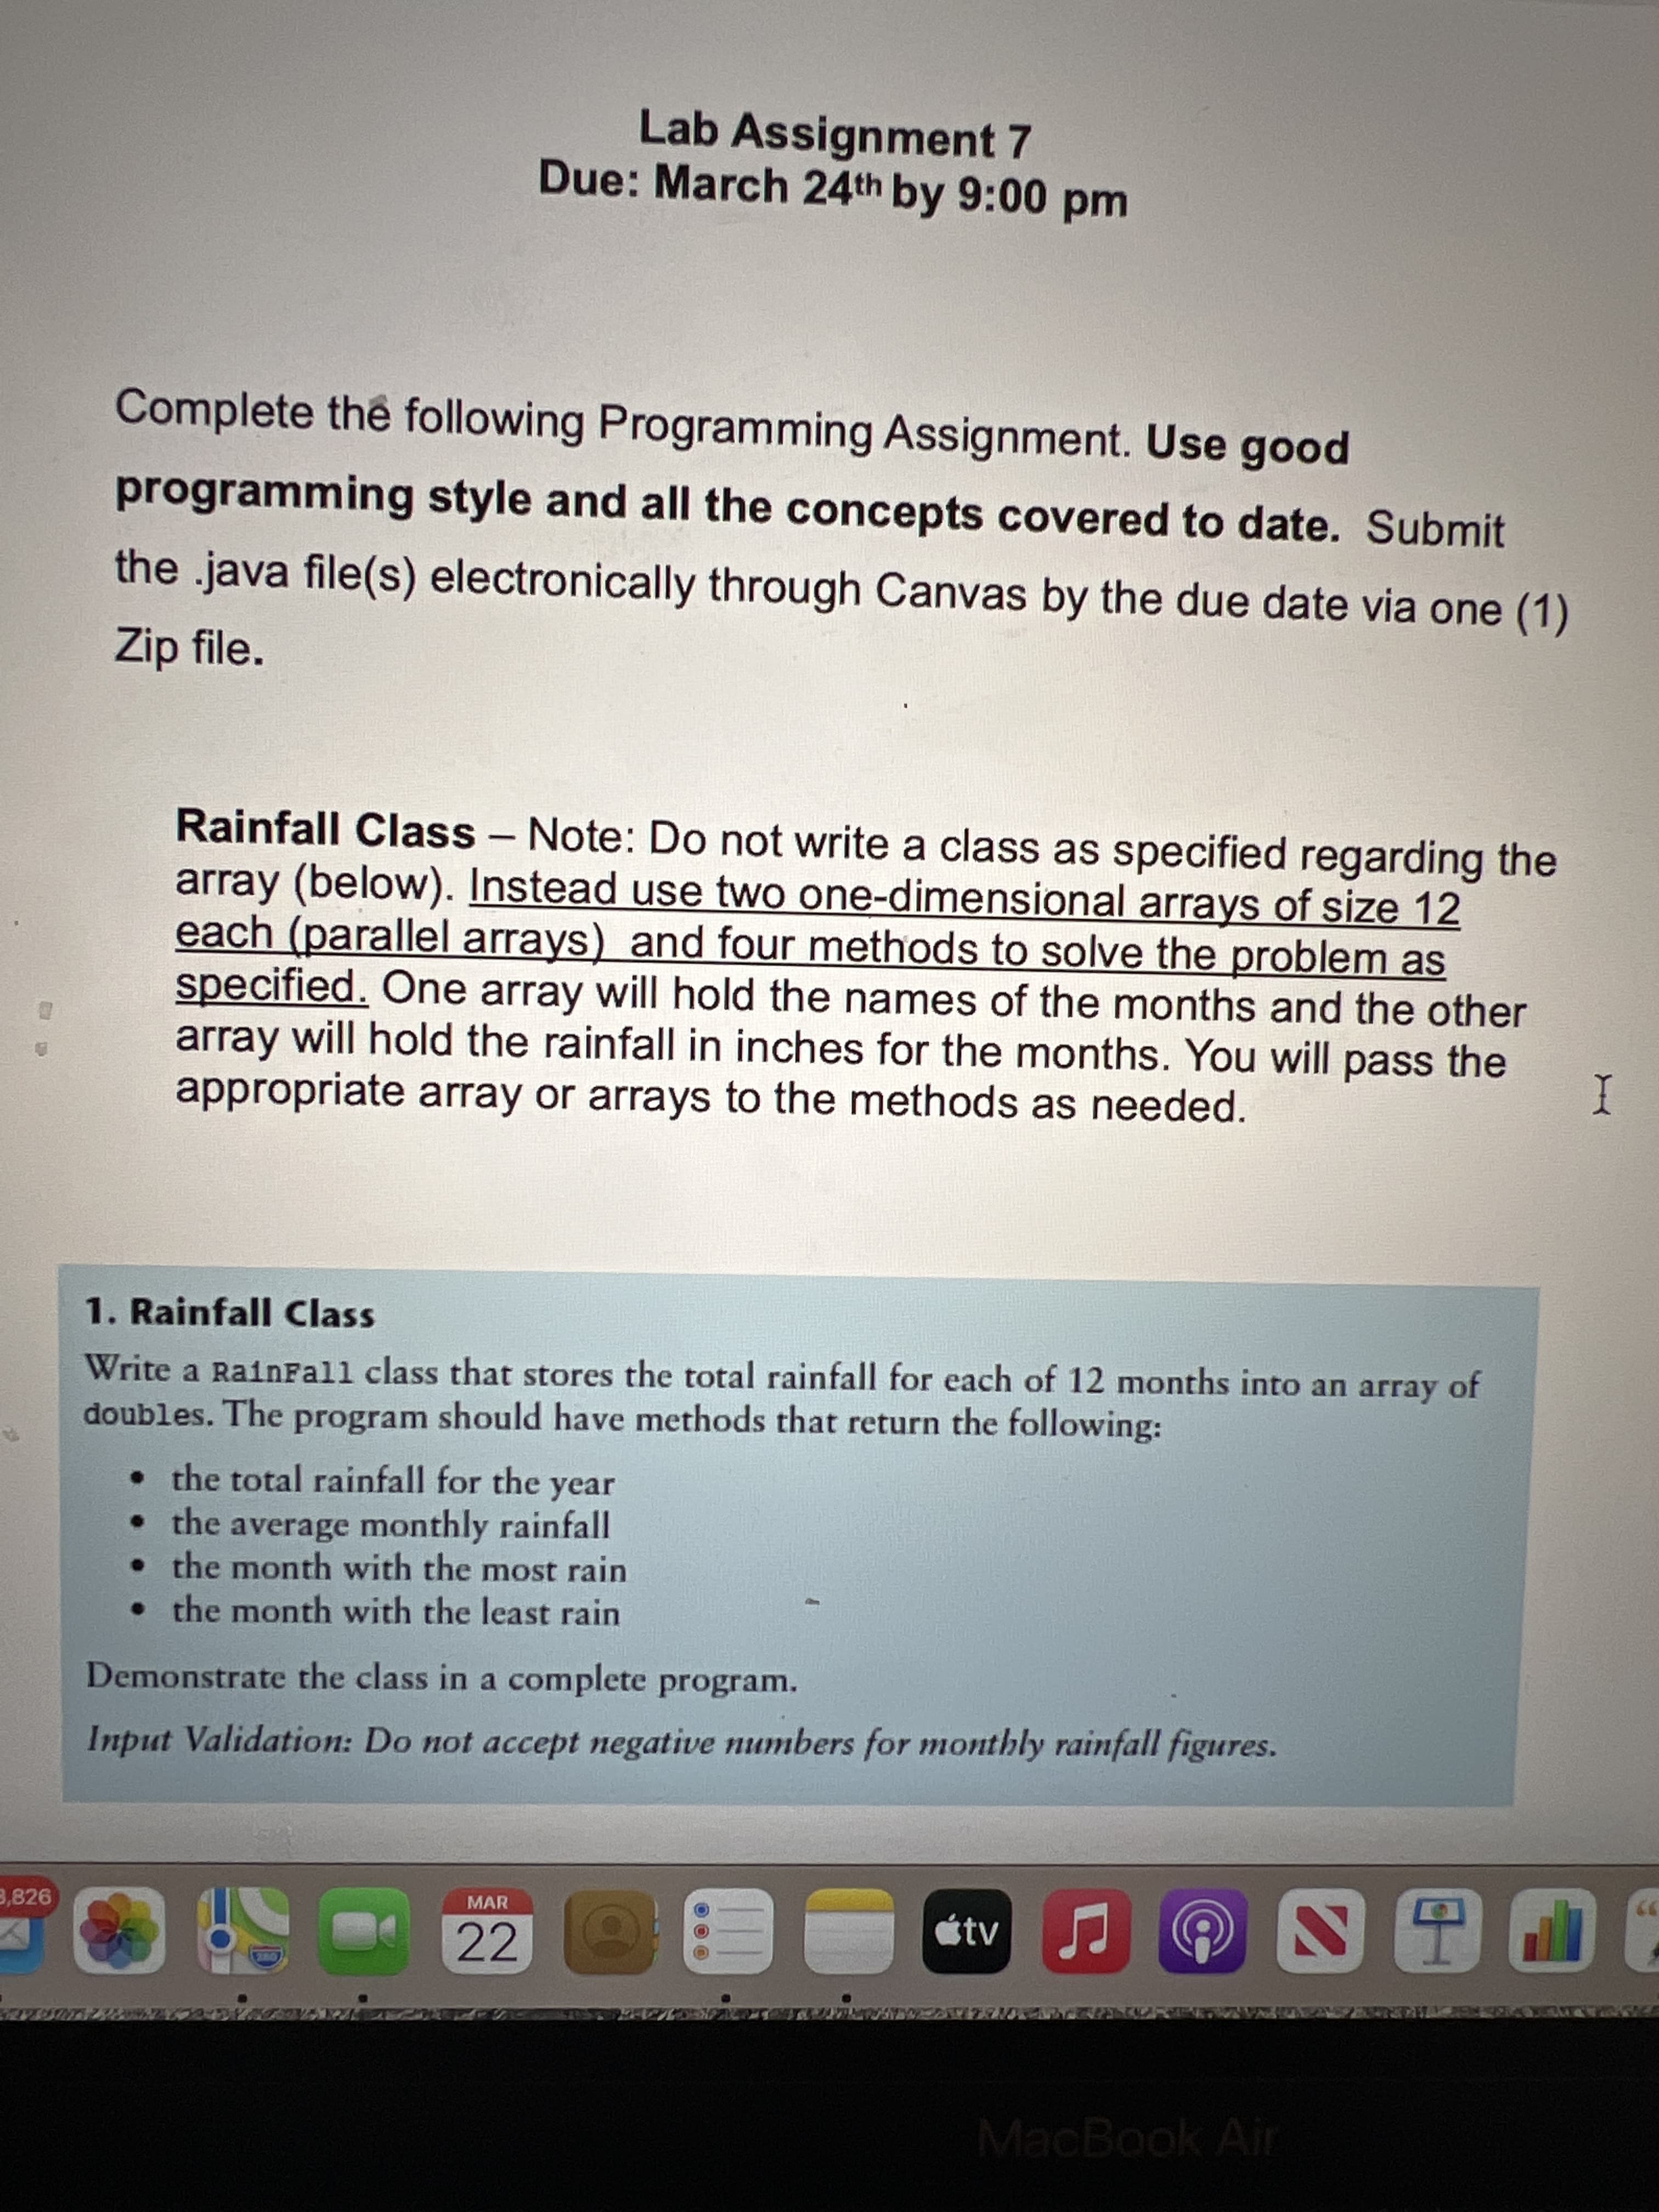 Lab Assignment 7
Due: March 24th by 9:00 pm
Complete the following Programming Assignment. Use good
programming style and all the concepts covered to date. Submit
the .java file(s) electronically through Canvas by the due date via one (1)
Zip file.
Rainfall Class - Note: Do not write a class as specified regarding the
array (below). Instead use two one-dimensional arrays of size 12
each (parallel arrays) and four methods to solve the problem as
specified. One array will hold the names of the months and the other
array will hold the rainfall in inches for the months. You will pass the
appropriate array or arrays to the methods as needed.
I
1. Rainfall Class
Write a RainFall class that stores the total rainfall for each of 12 months into an array of
doubles. The program should have methods that return the following:
• the total rainfall for the
• the average monthly rainfall
• the month with the most rain
• the month with the least rain
year
Demonstrate the class in a complete program.
Input Validation: Do not accept negative numbers for monthly rainfall figures.
3,826
MAR
22
MacBook Air
